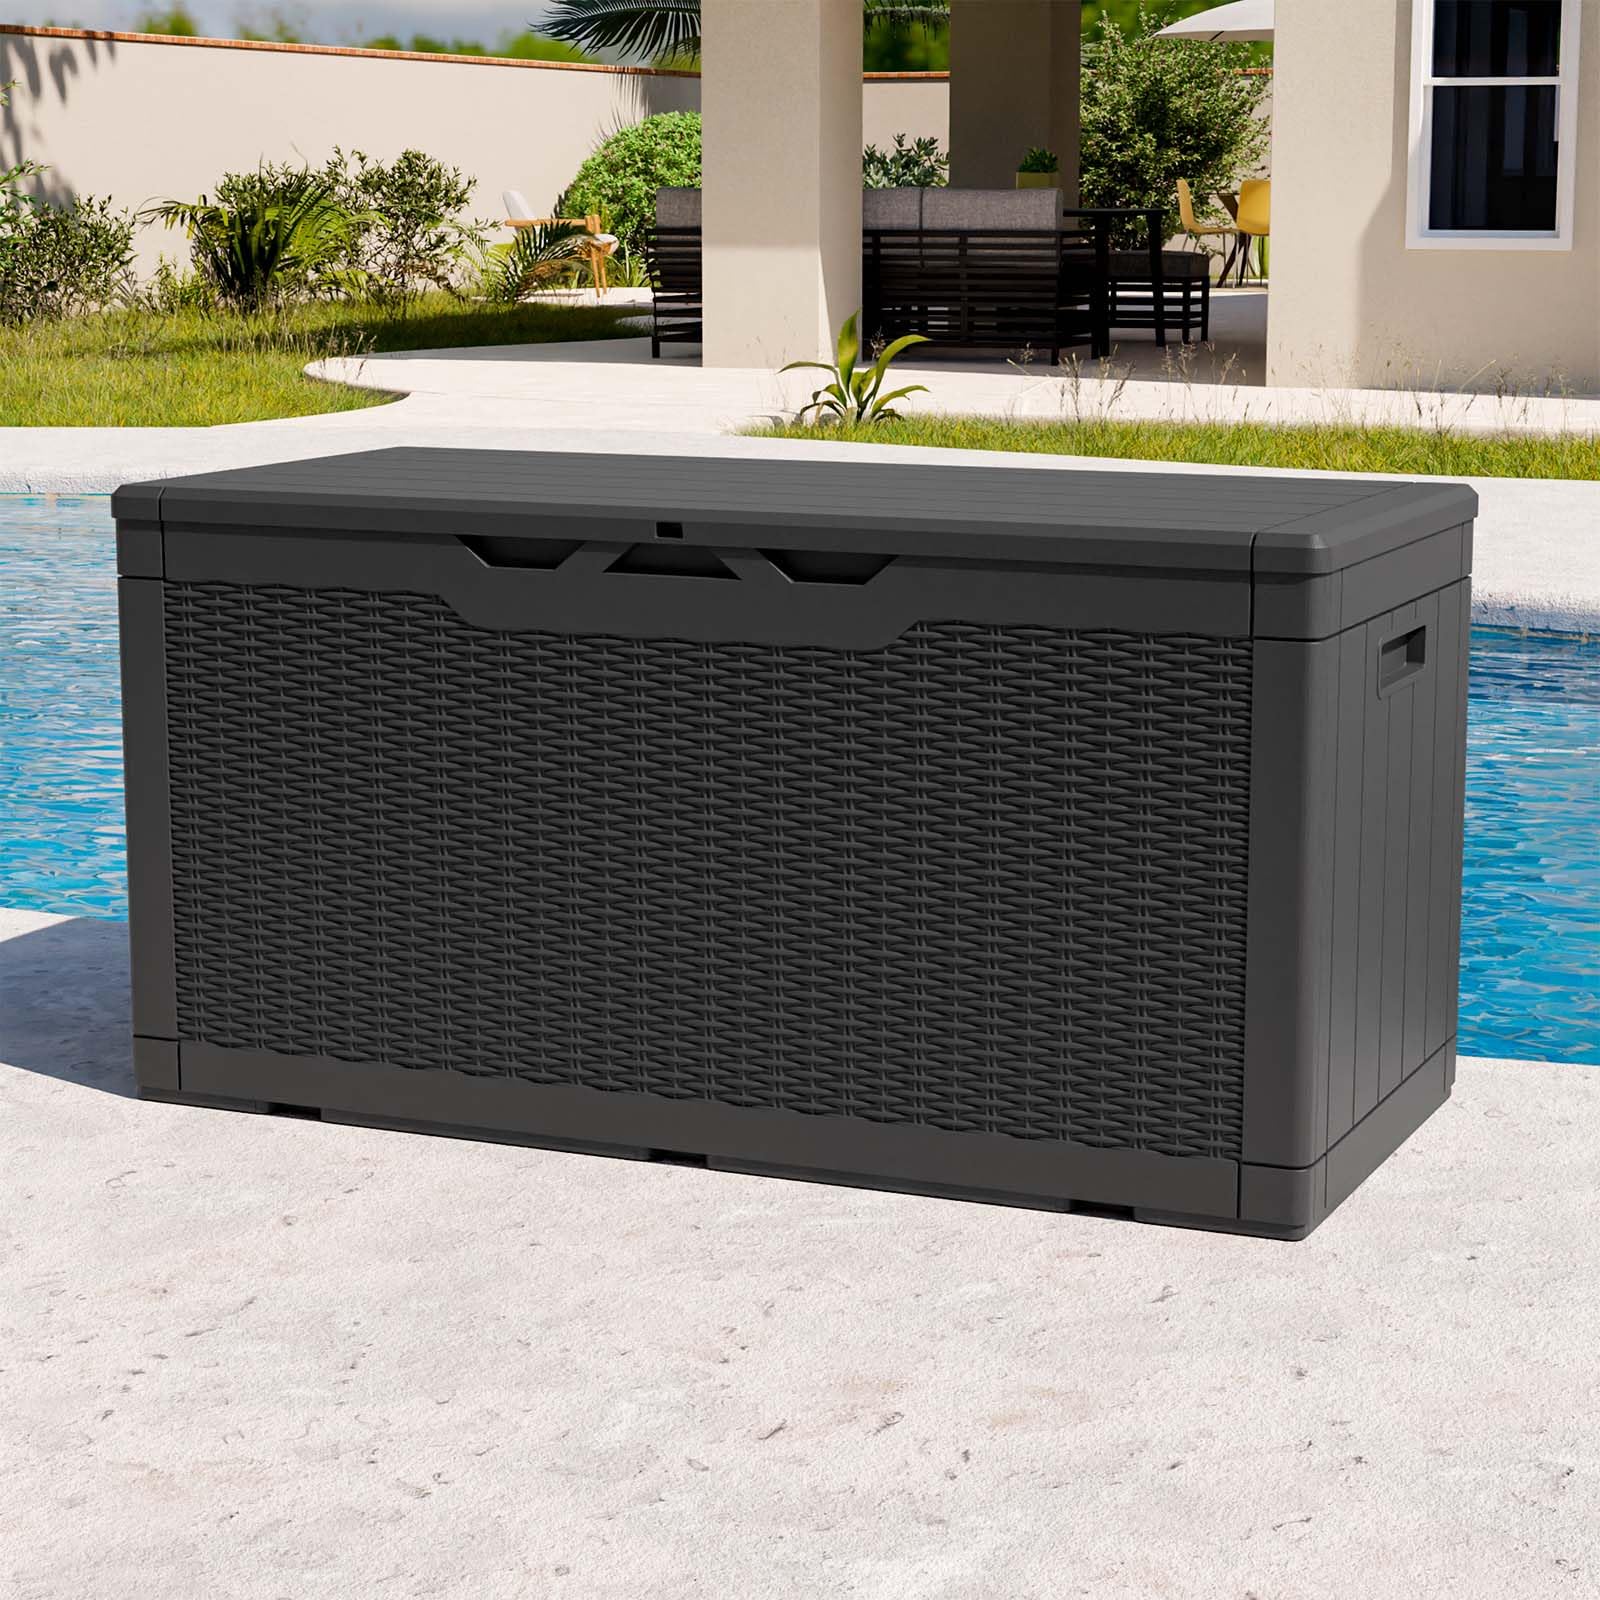 Patiowell 100 Gallon Outdoor Resin Deck Box, Waterproof Large Storage Box for Patio Furniture, Pool Accessories, Toys, Garden Tools and Sports Equipment, Lockable, Black